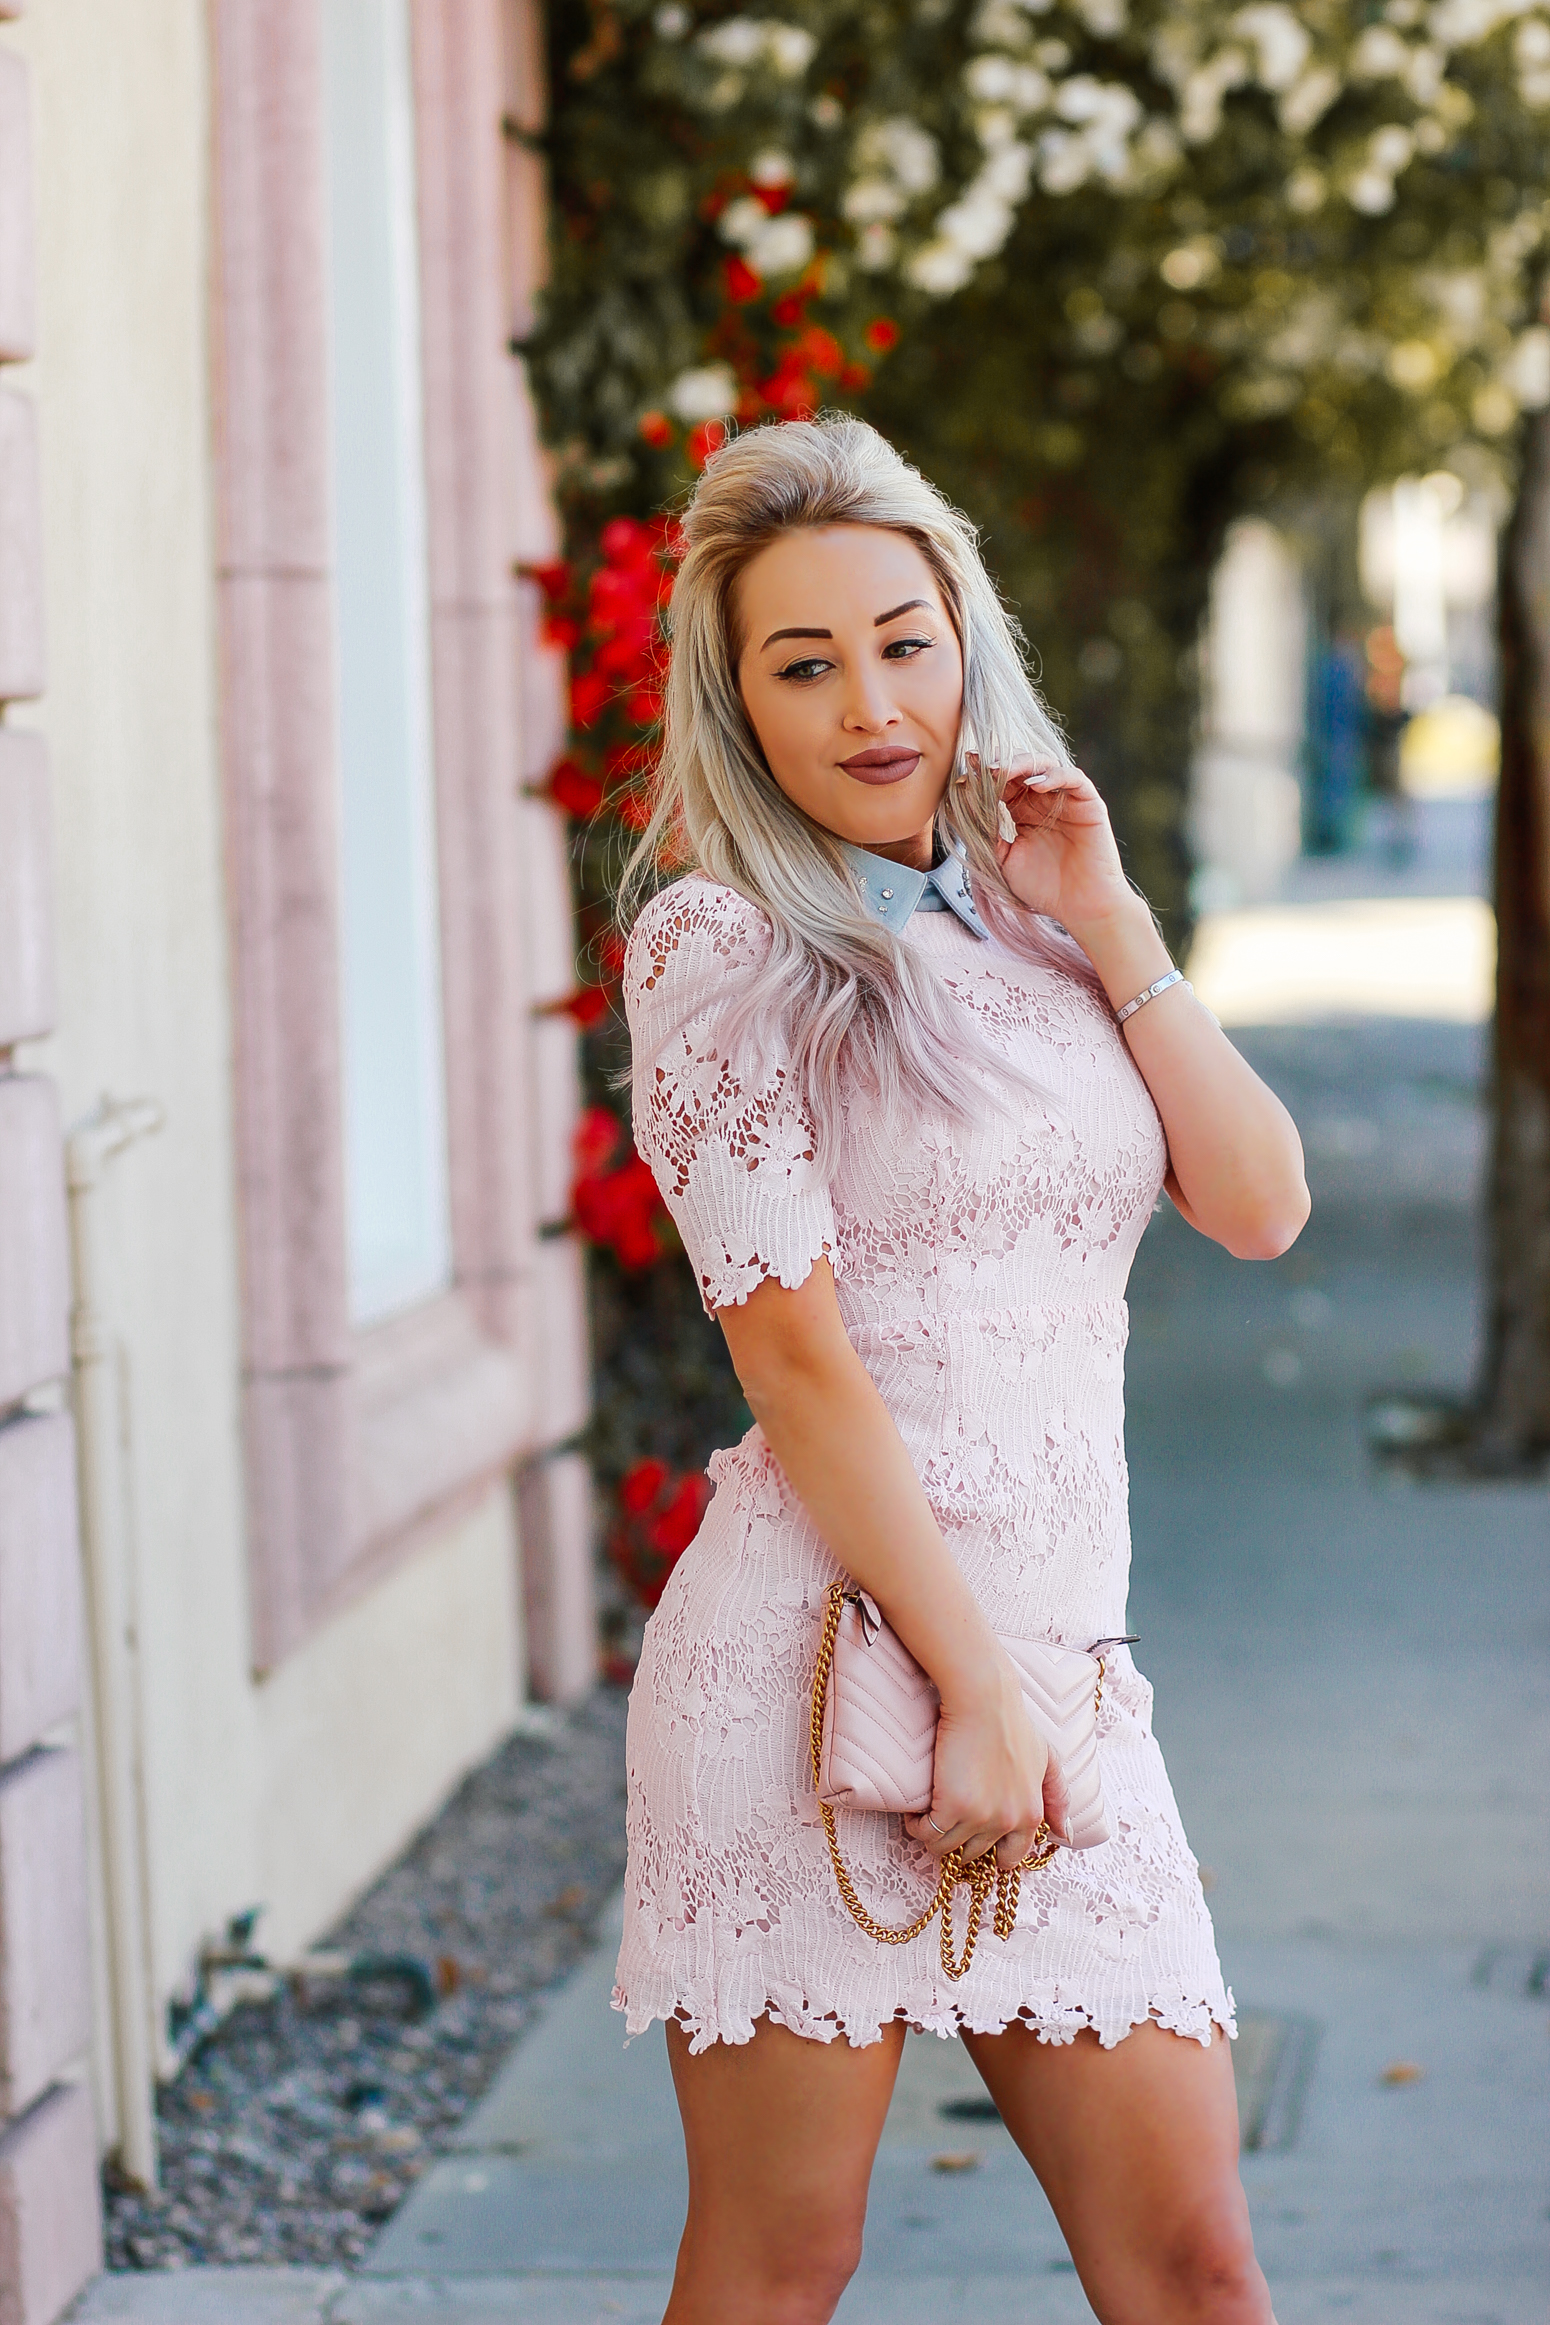 Blondie in the City | Gossip Girl/Blair Waldorf Vibes | Pink & Blue Pastel Lace Dress | Pink Christian Louboutin's